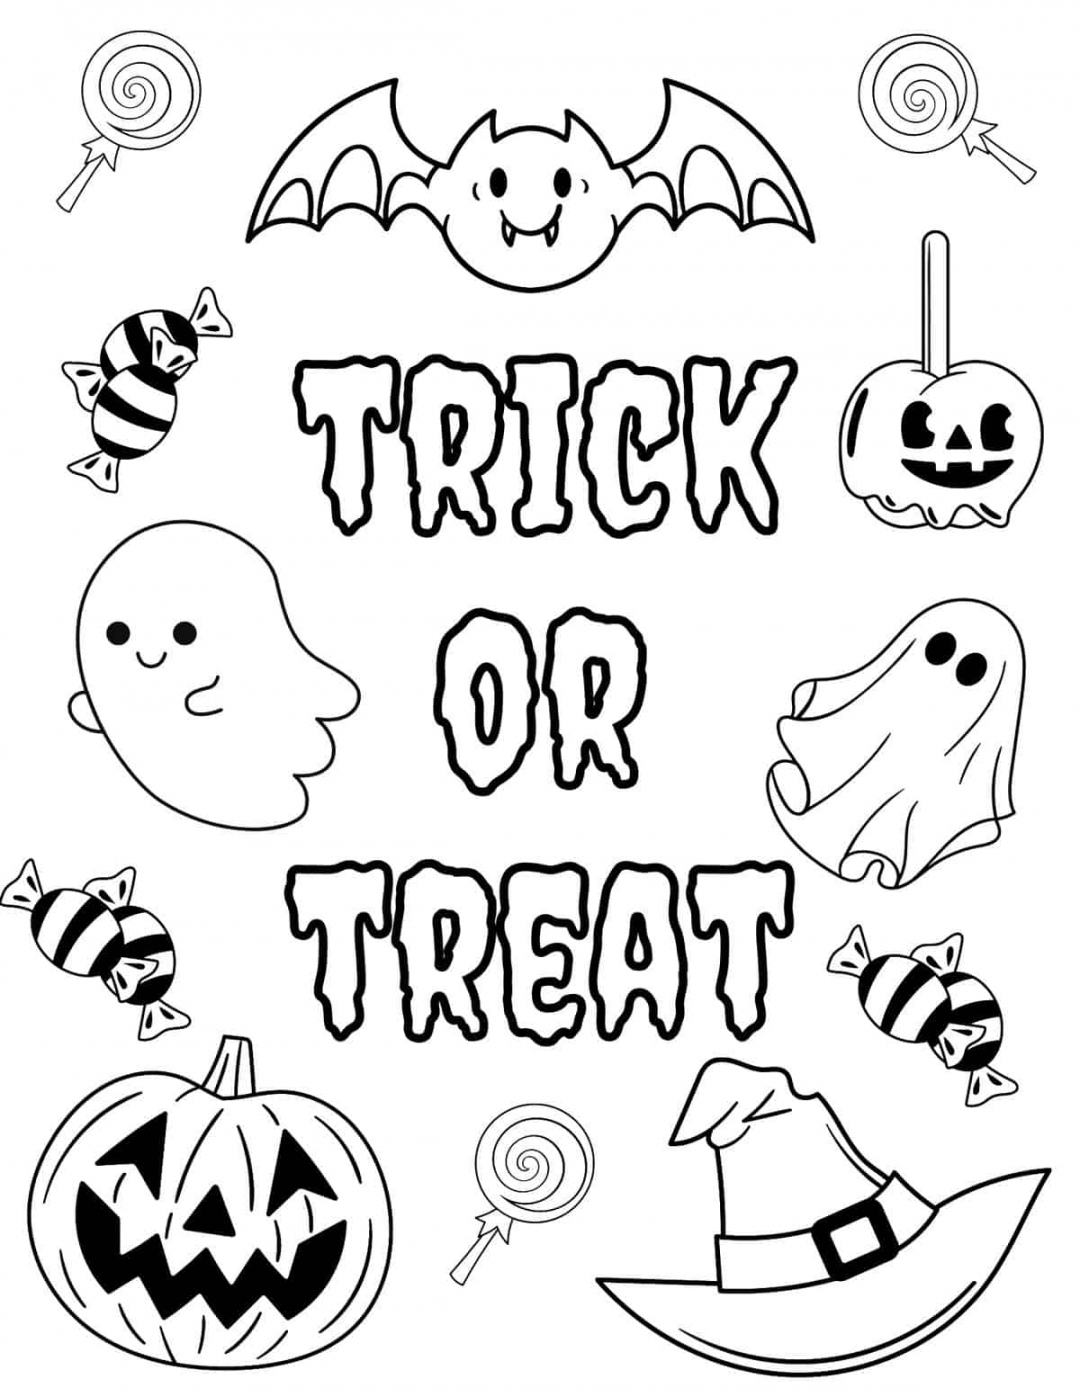 Free Halloween Coloring Pages for Kids & Adults - Prudent Penny